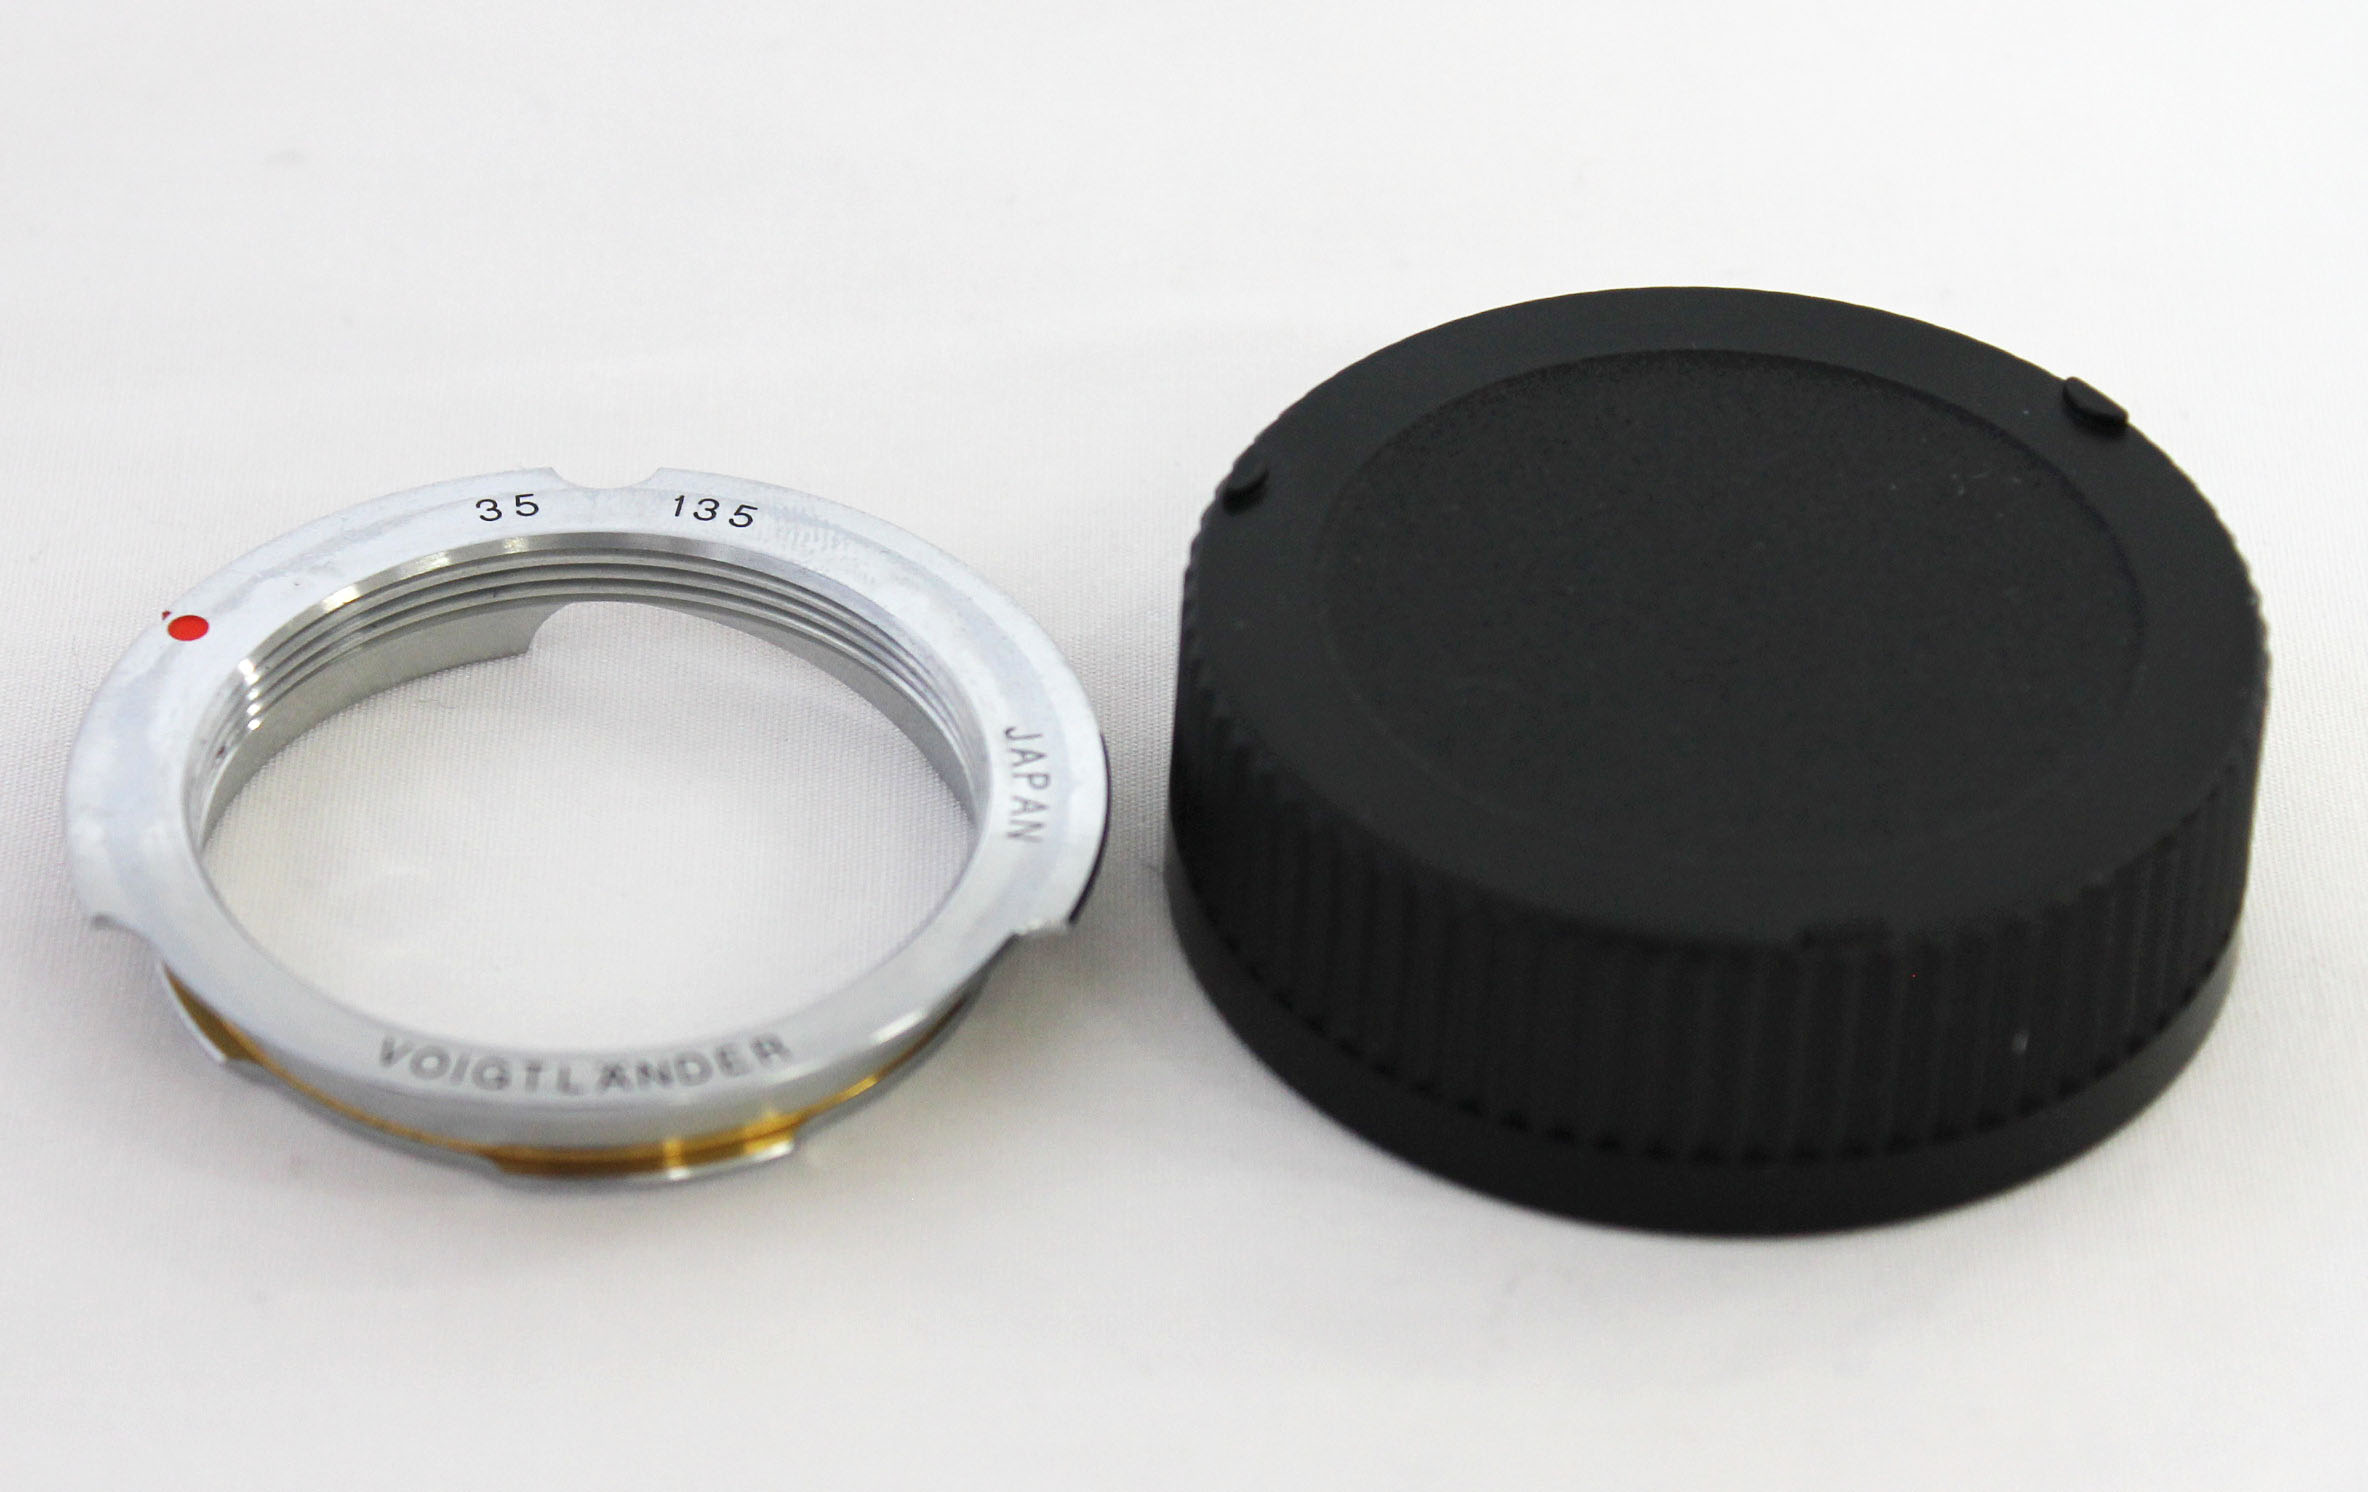 Voigtlander M-Bayonet Adapter Ring Type II 35-135 L39 to Leica M from Japan